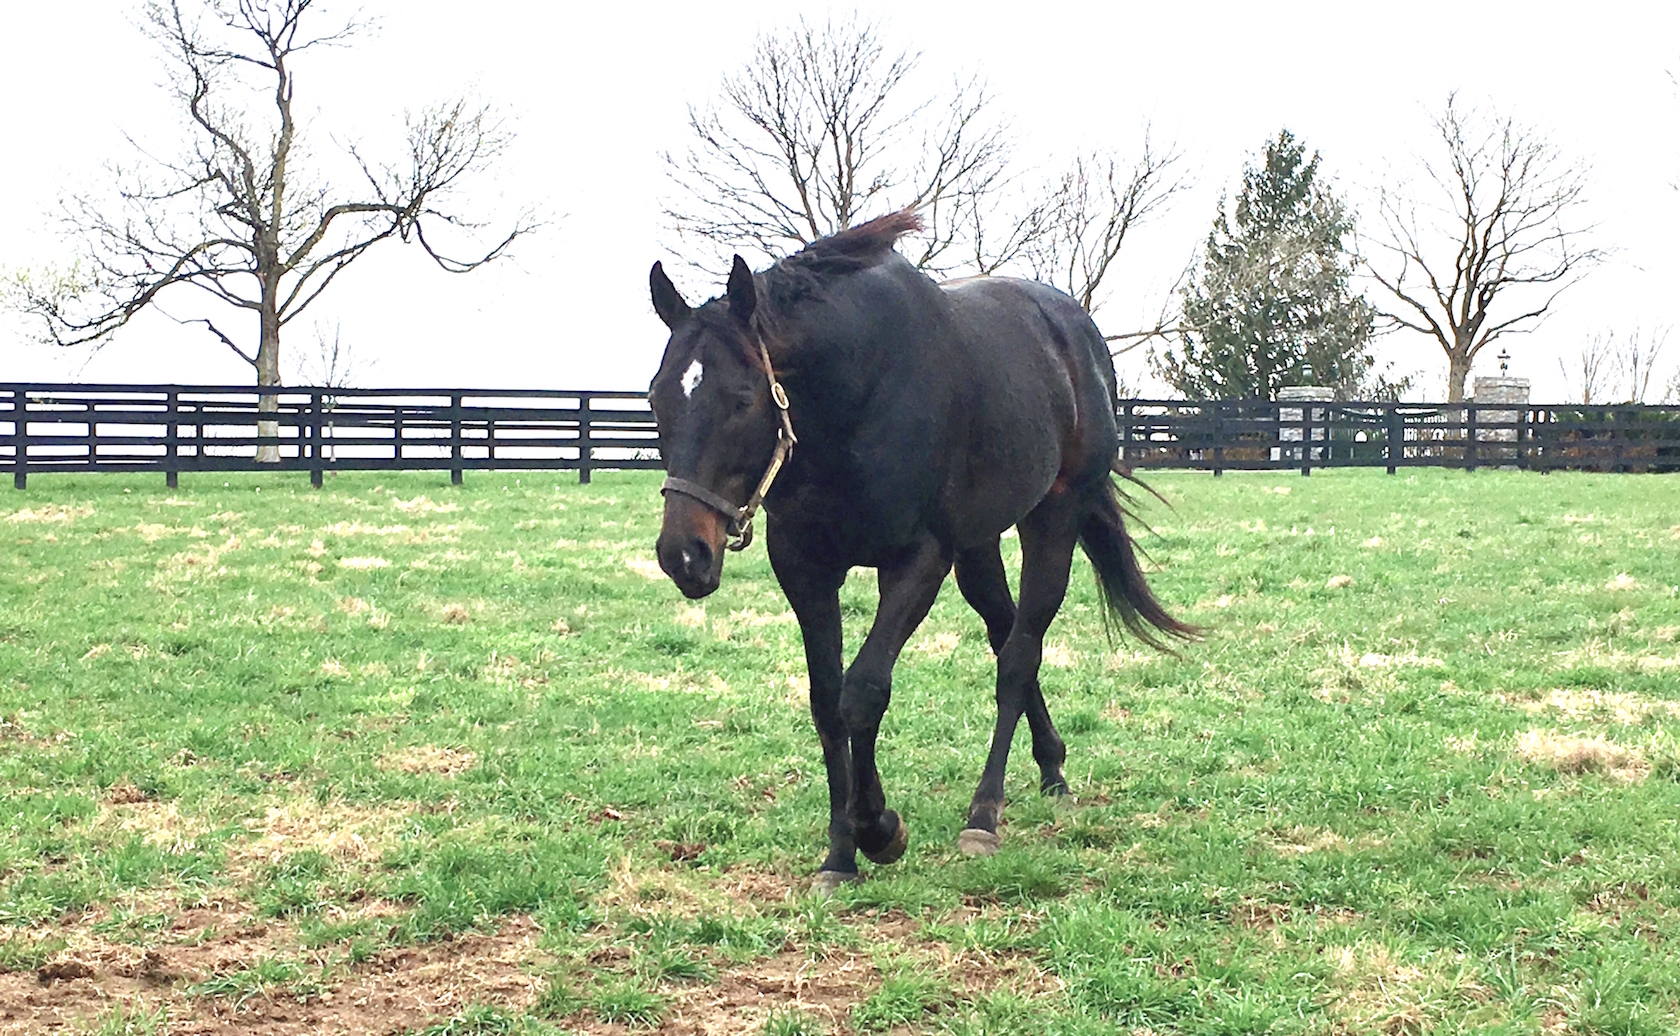 Pioneerof the Nile, sire of American Pharoah, heads to meet fans at the fence during a Horse Country tour at WinStar Farm. Photo: Amanda Duckworth